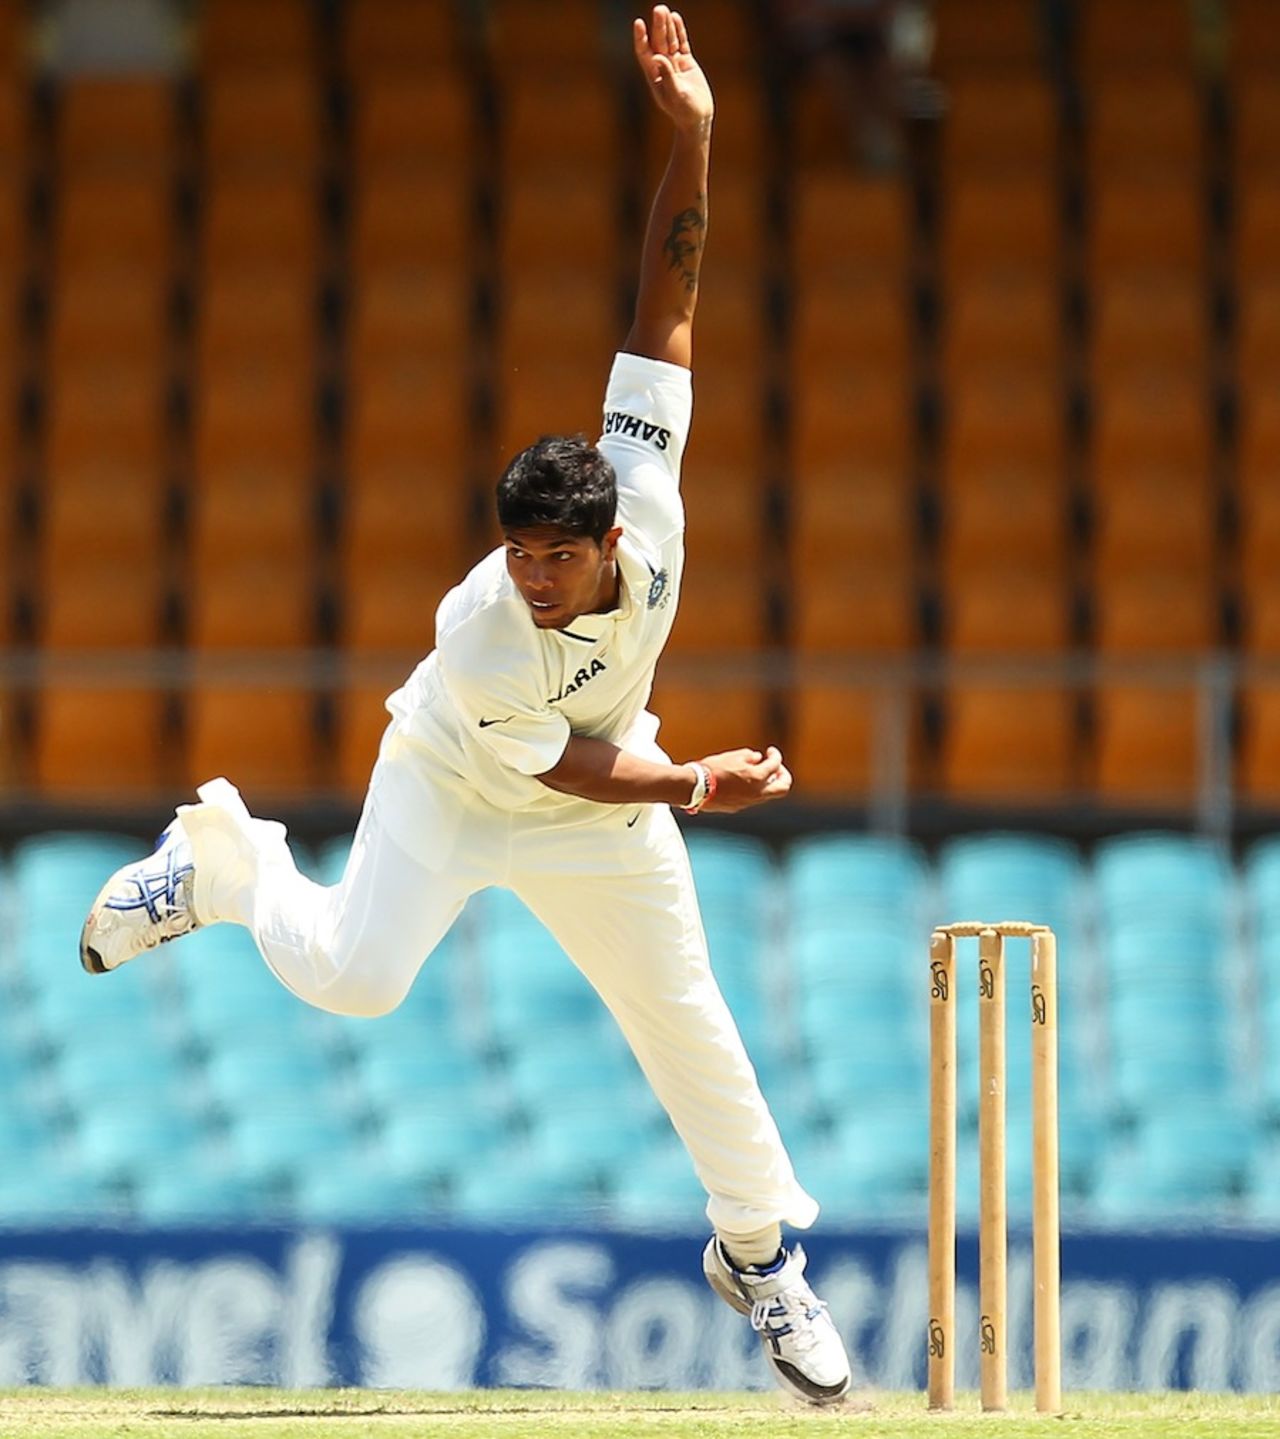 Umesh Yadav bowls on the opening day of India's tour, Cricket Australia Chairman's XI v Indians, Canberra, 1st day, December 15, 2011